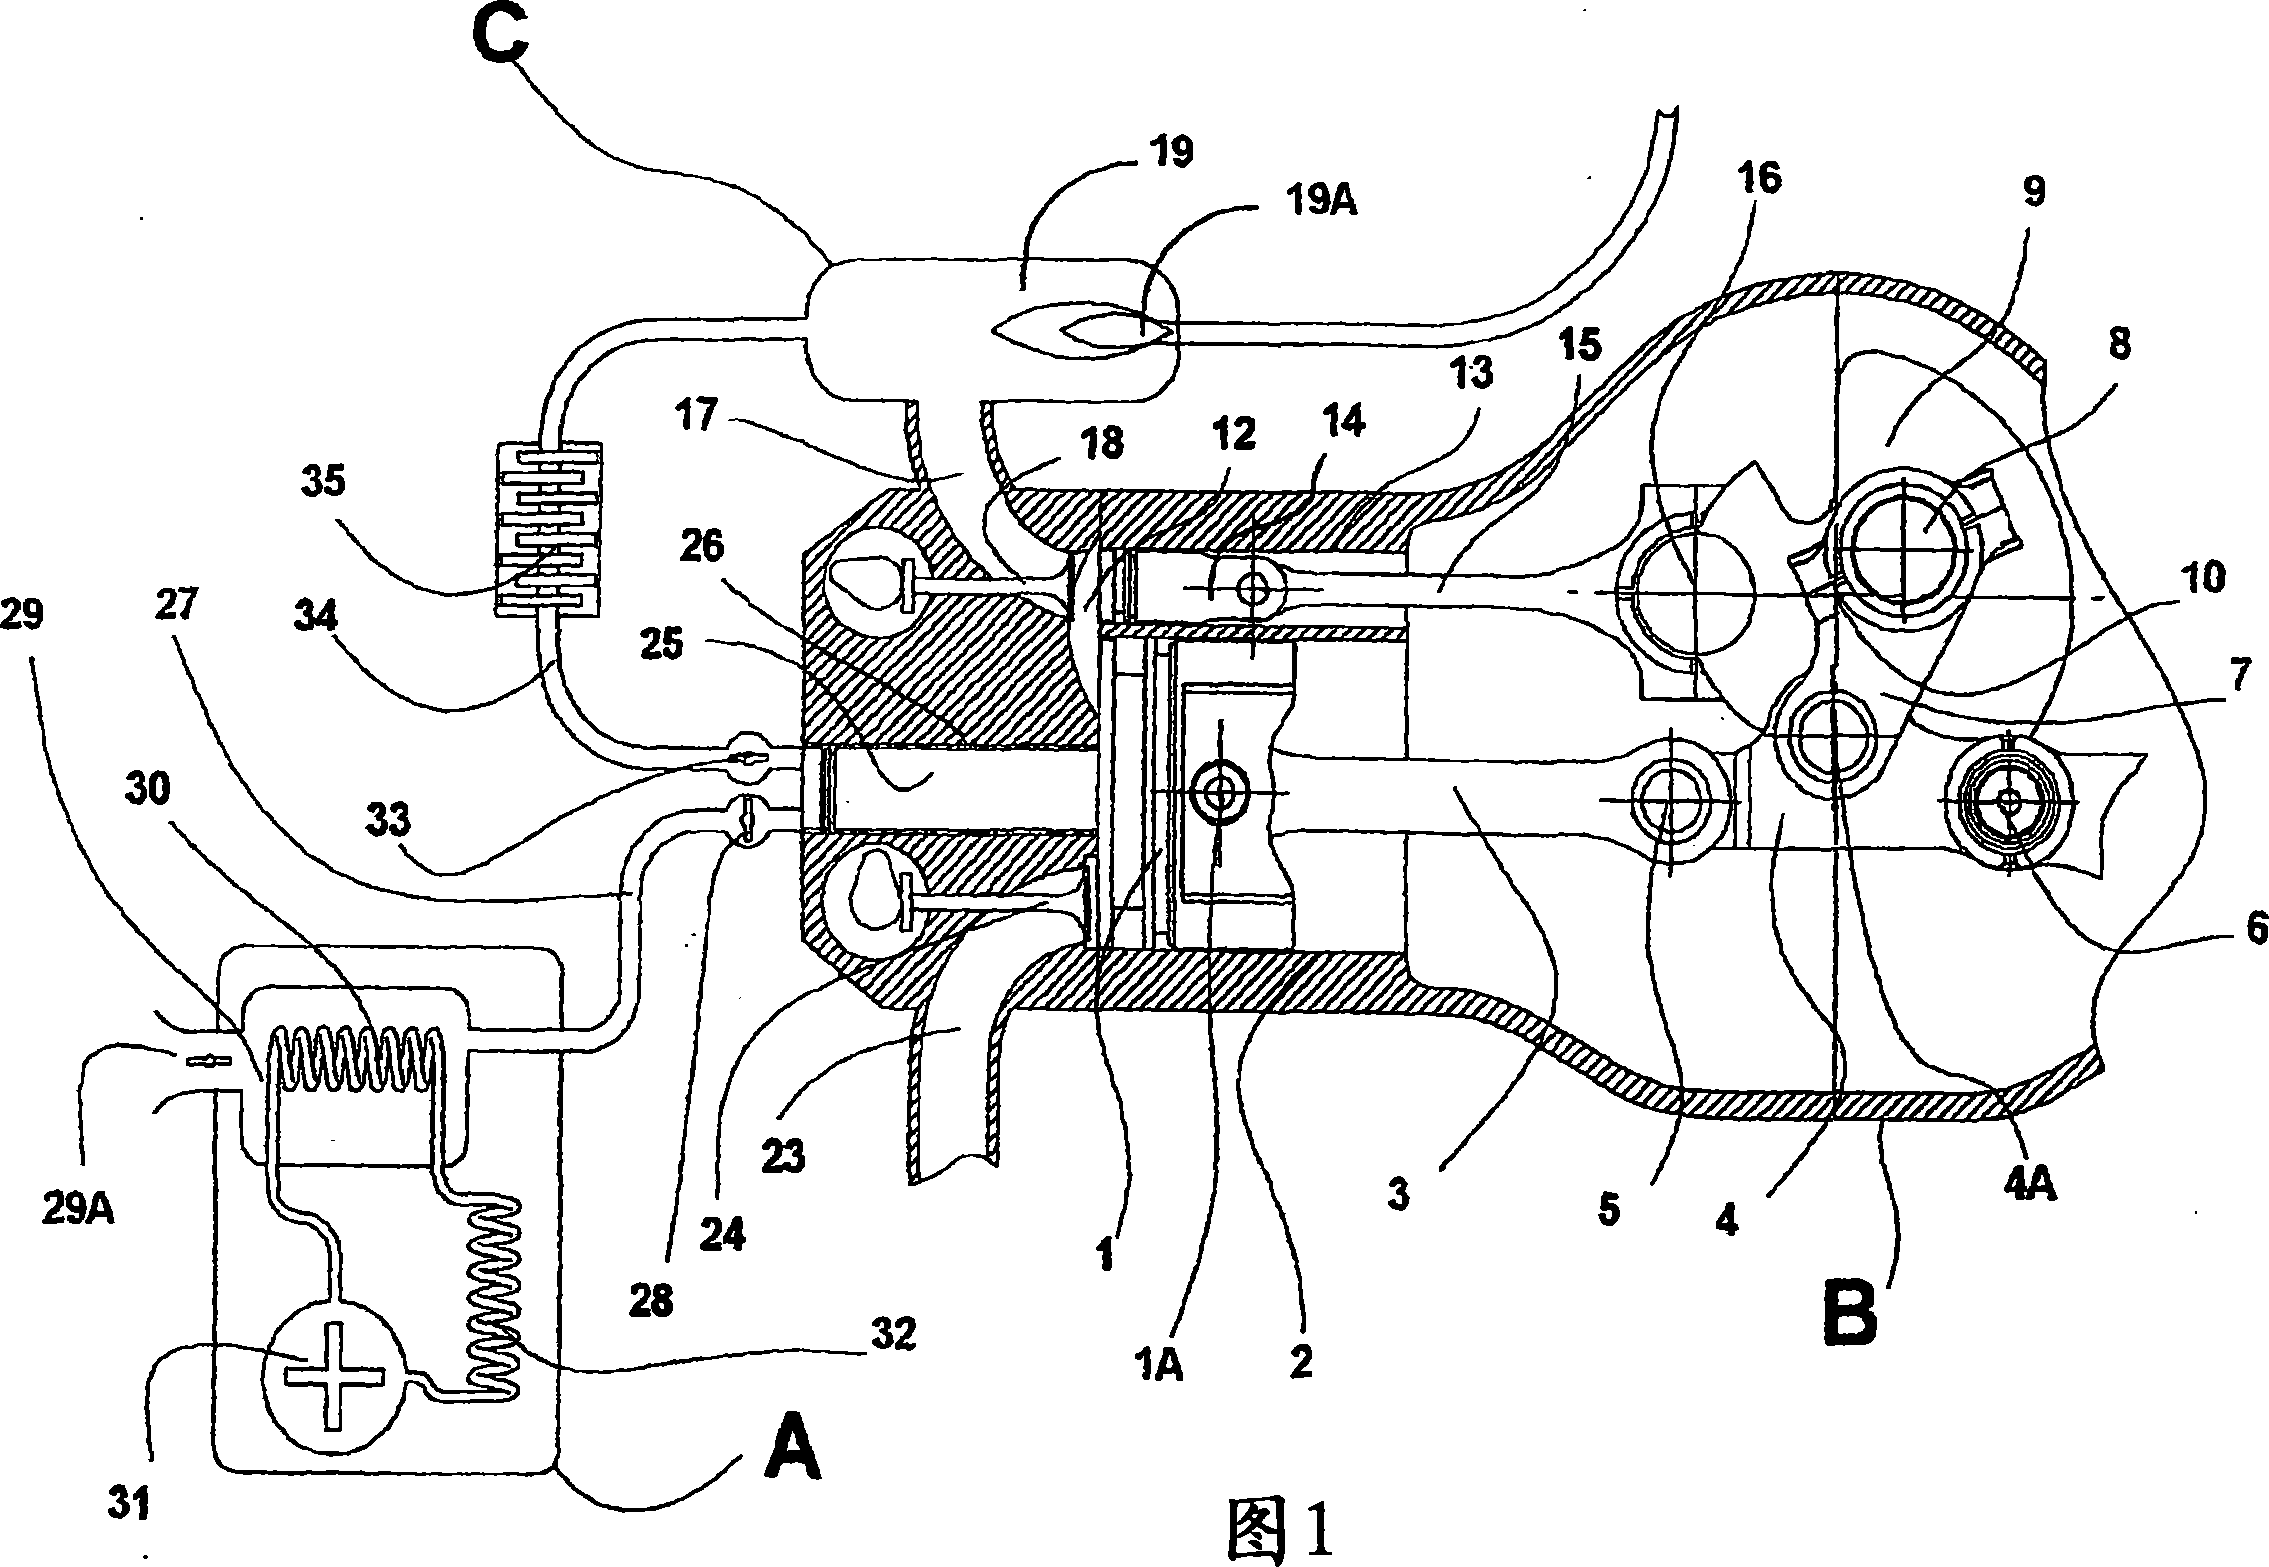 Low-temperature motor compressor unit with continuous 'cold' combustion at constant pressure and with active chamber